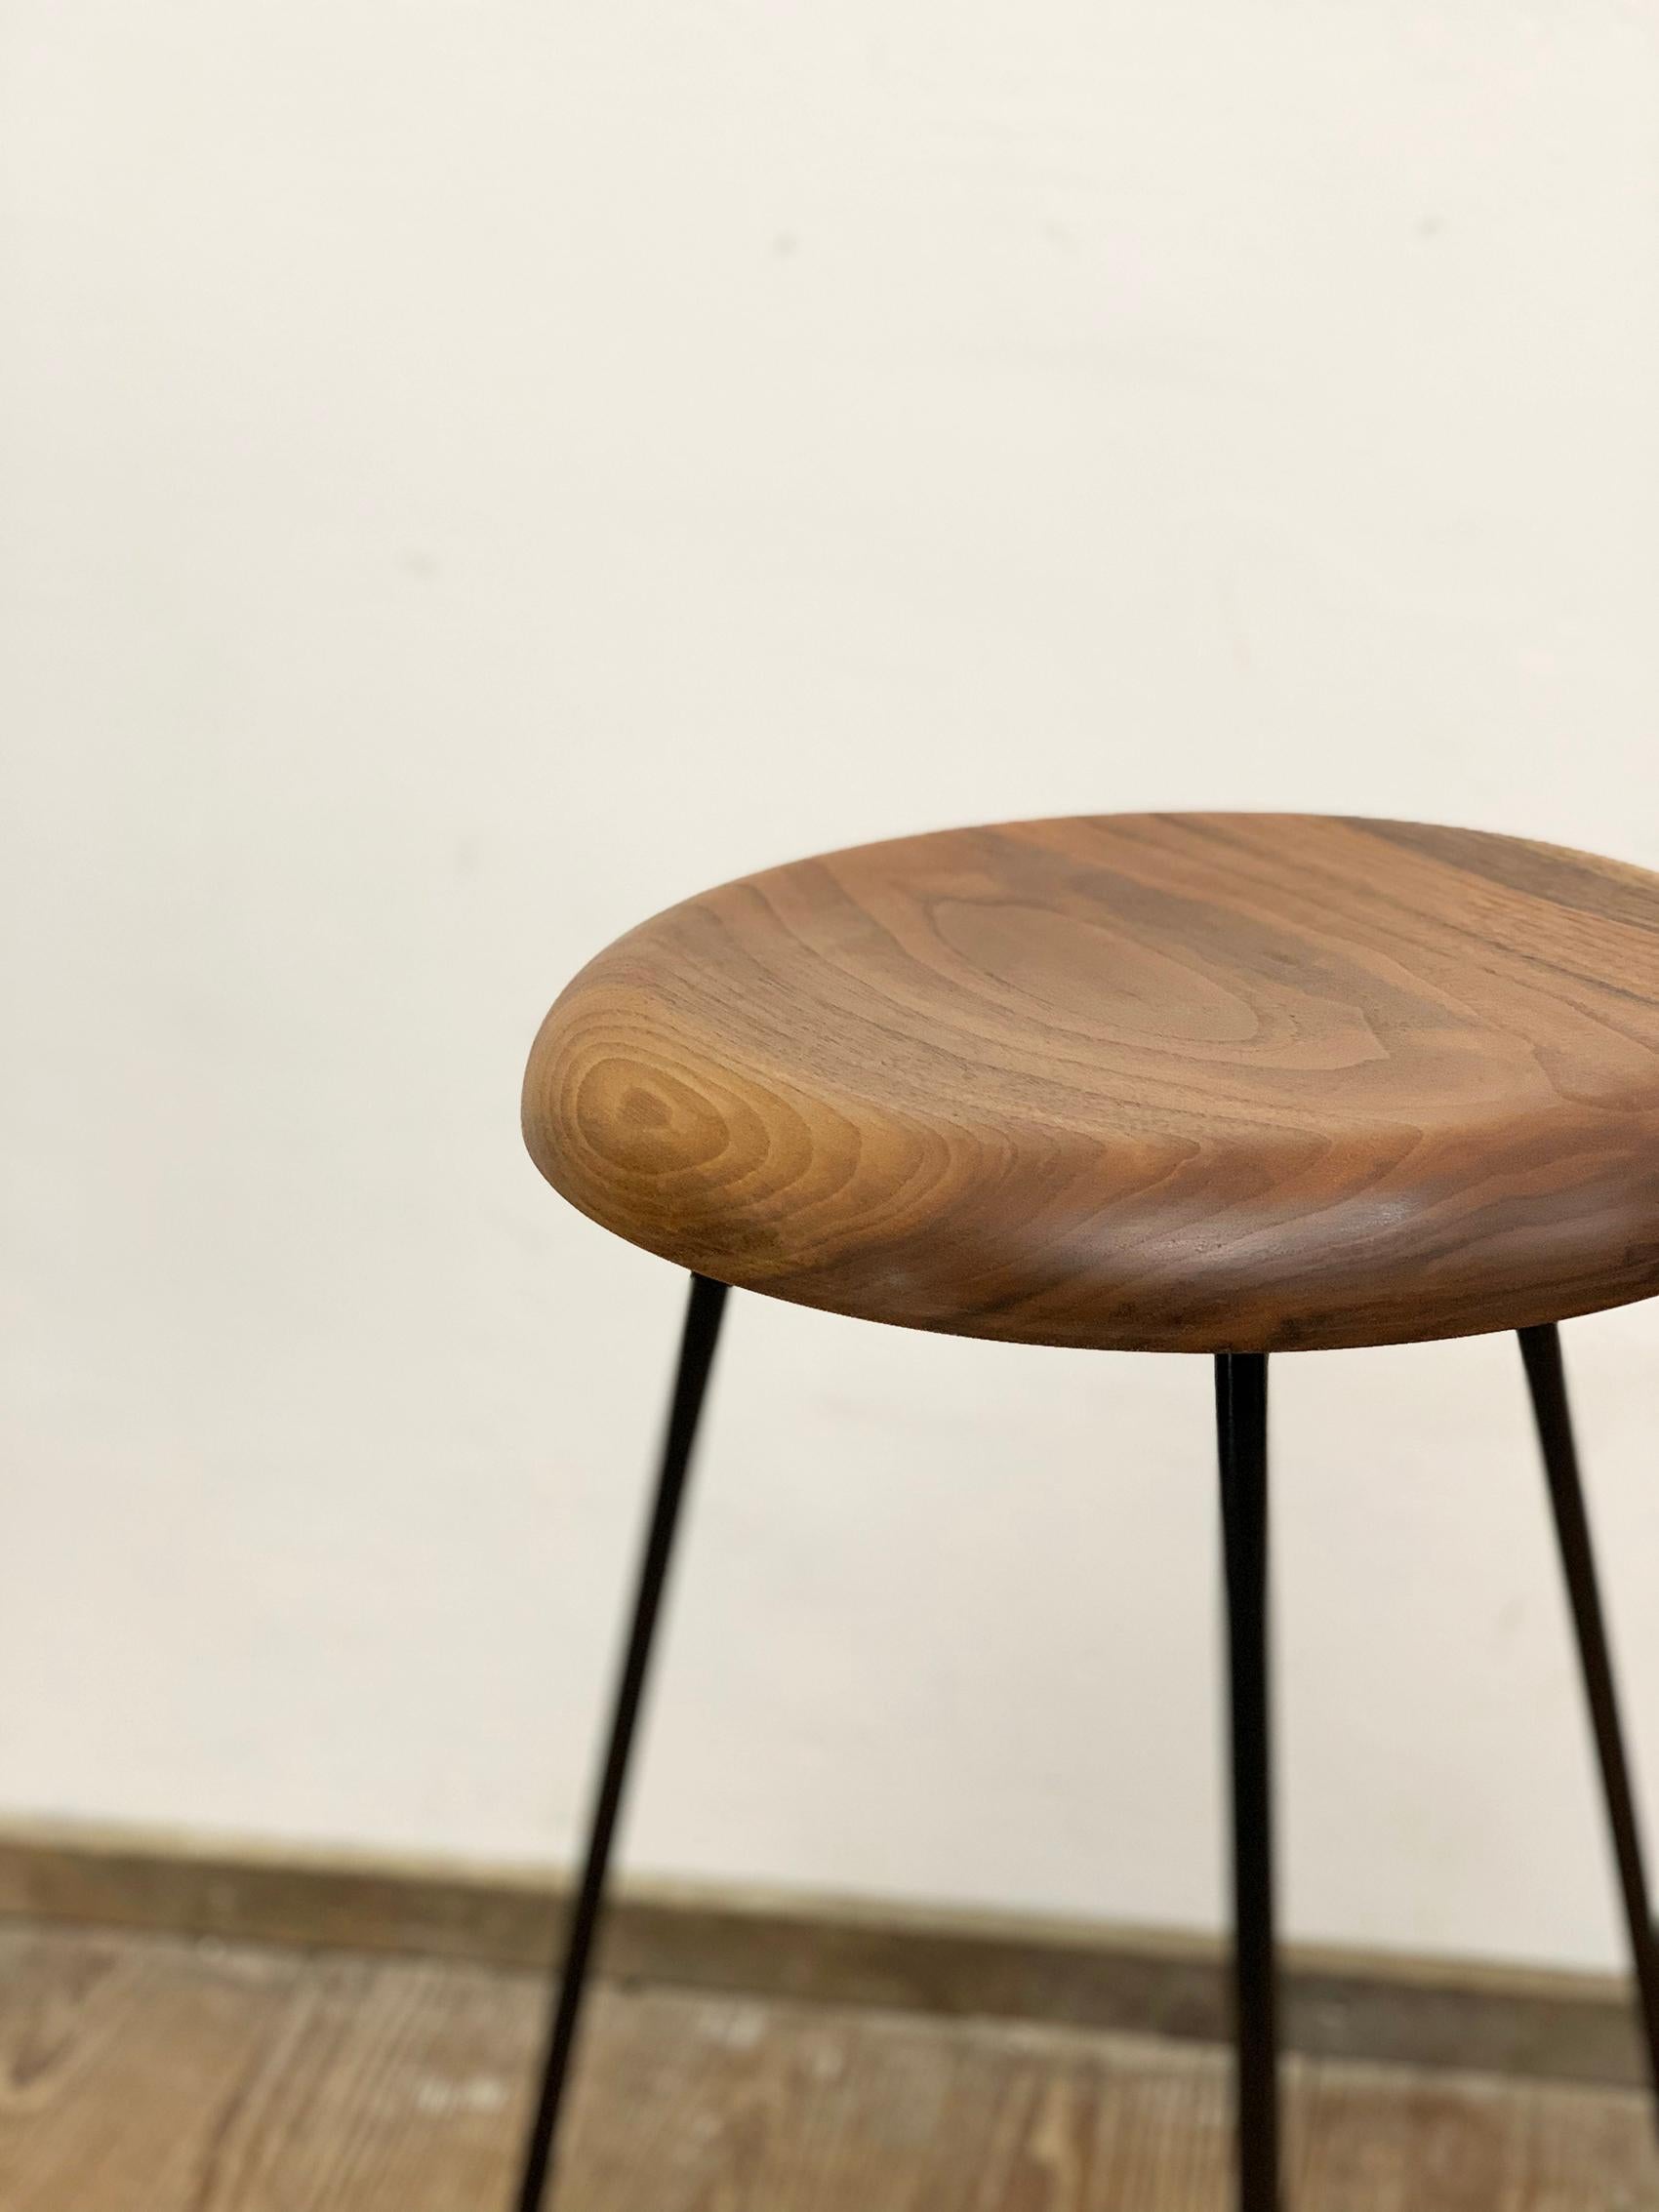 Bar Stool with Black Steel Frame and Massive Walnut Seat In Excellent Condition For Sale In München, Bavaria